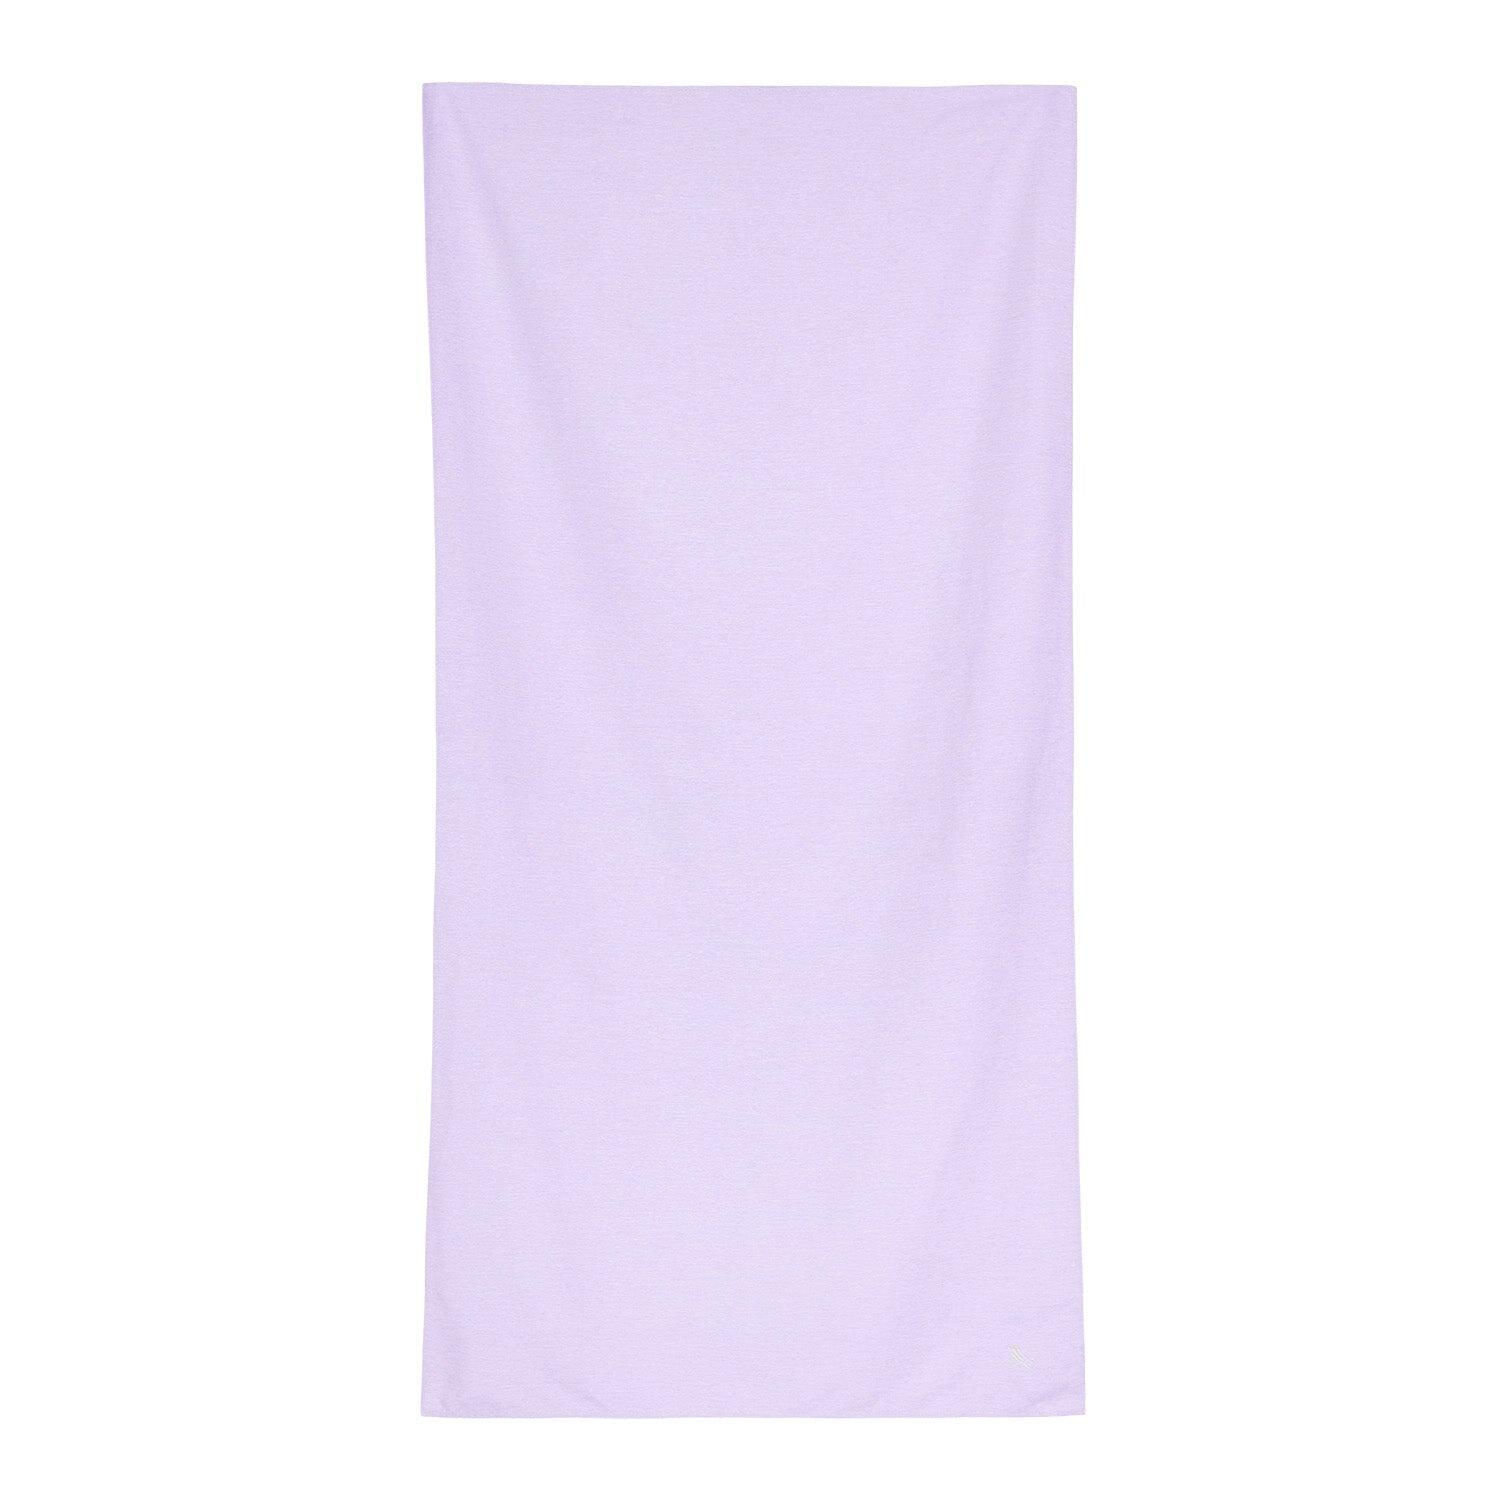 DOCK & BAY Quick Dry Towels - Meadow Lilac